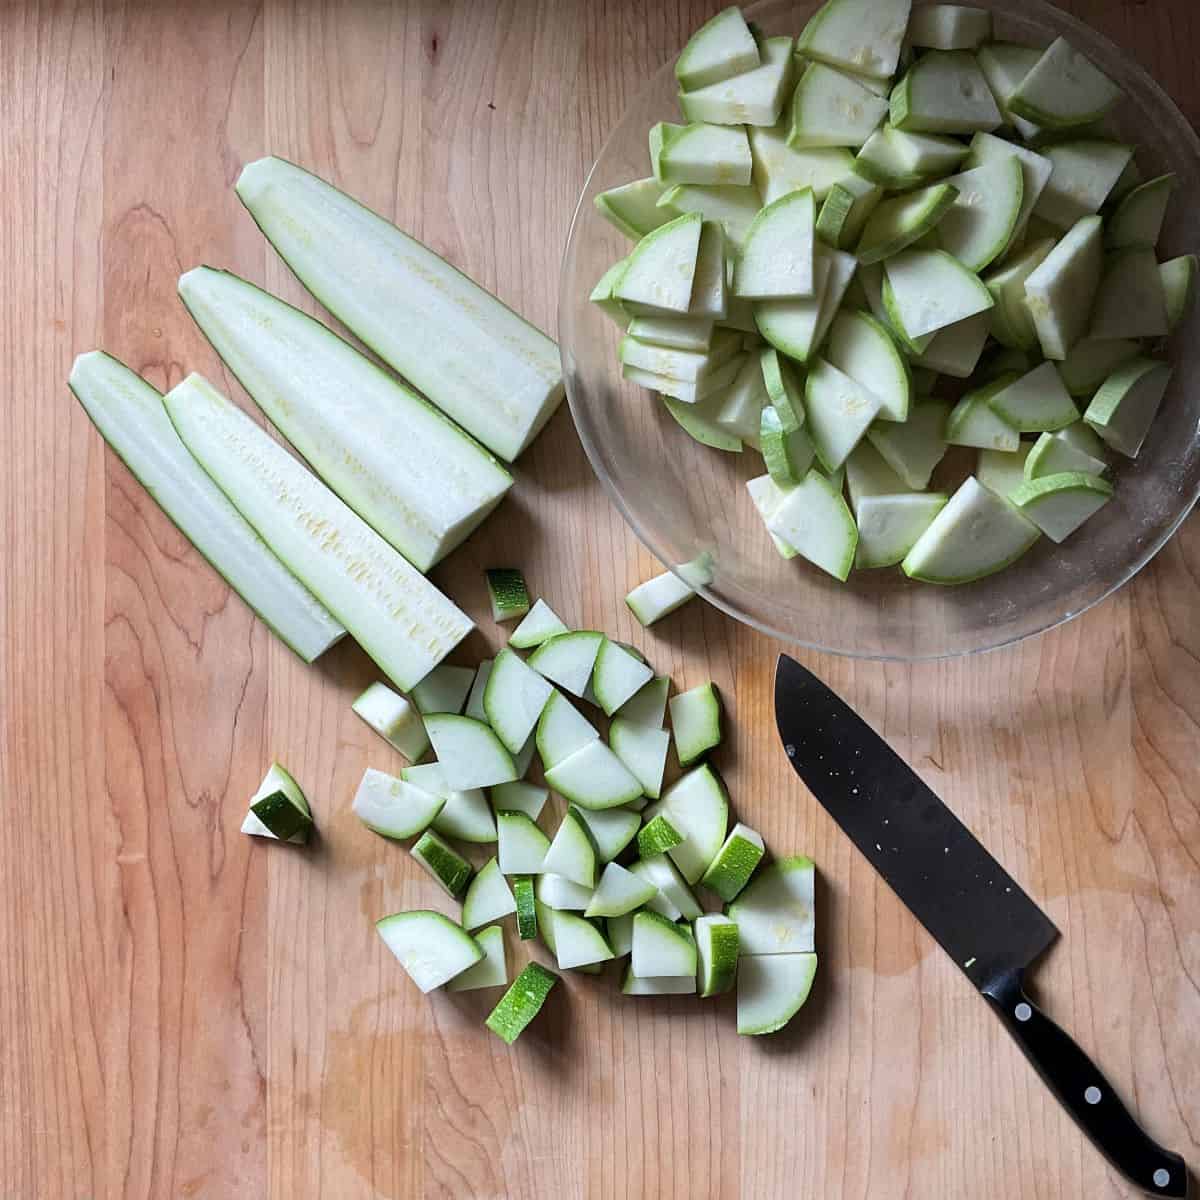 Sliced zucchini on a wooden board.